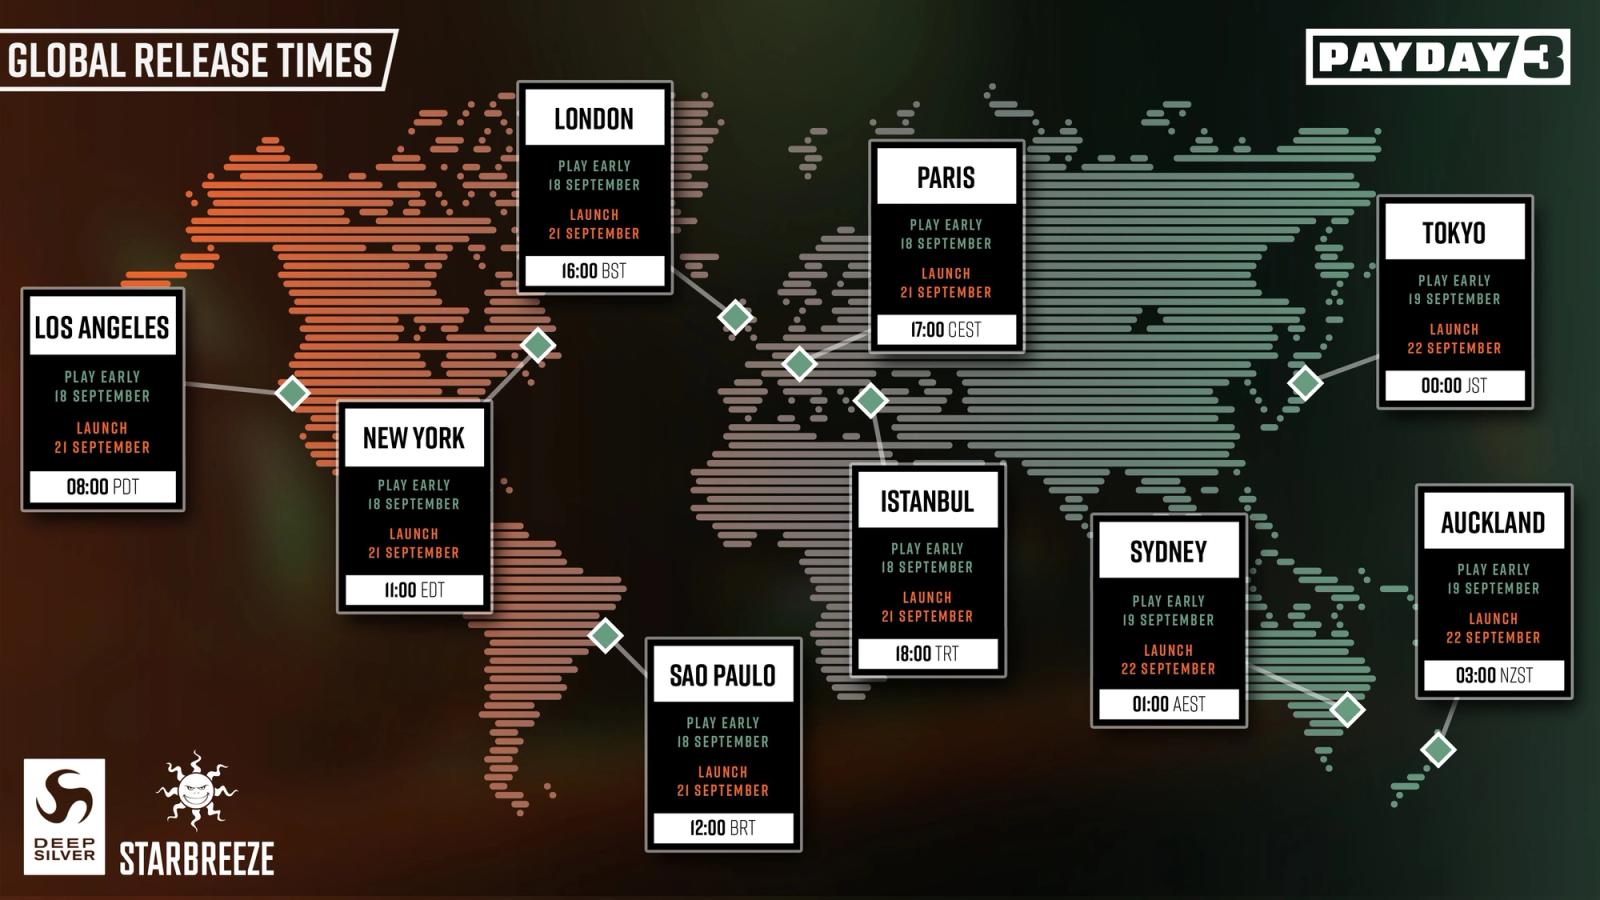 Payday 3 release time - timetable